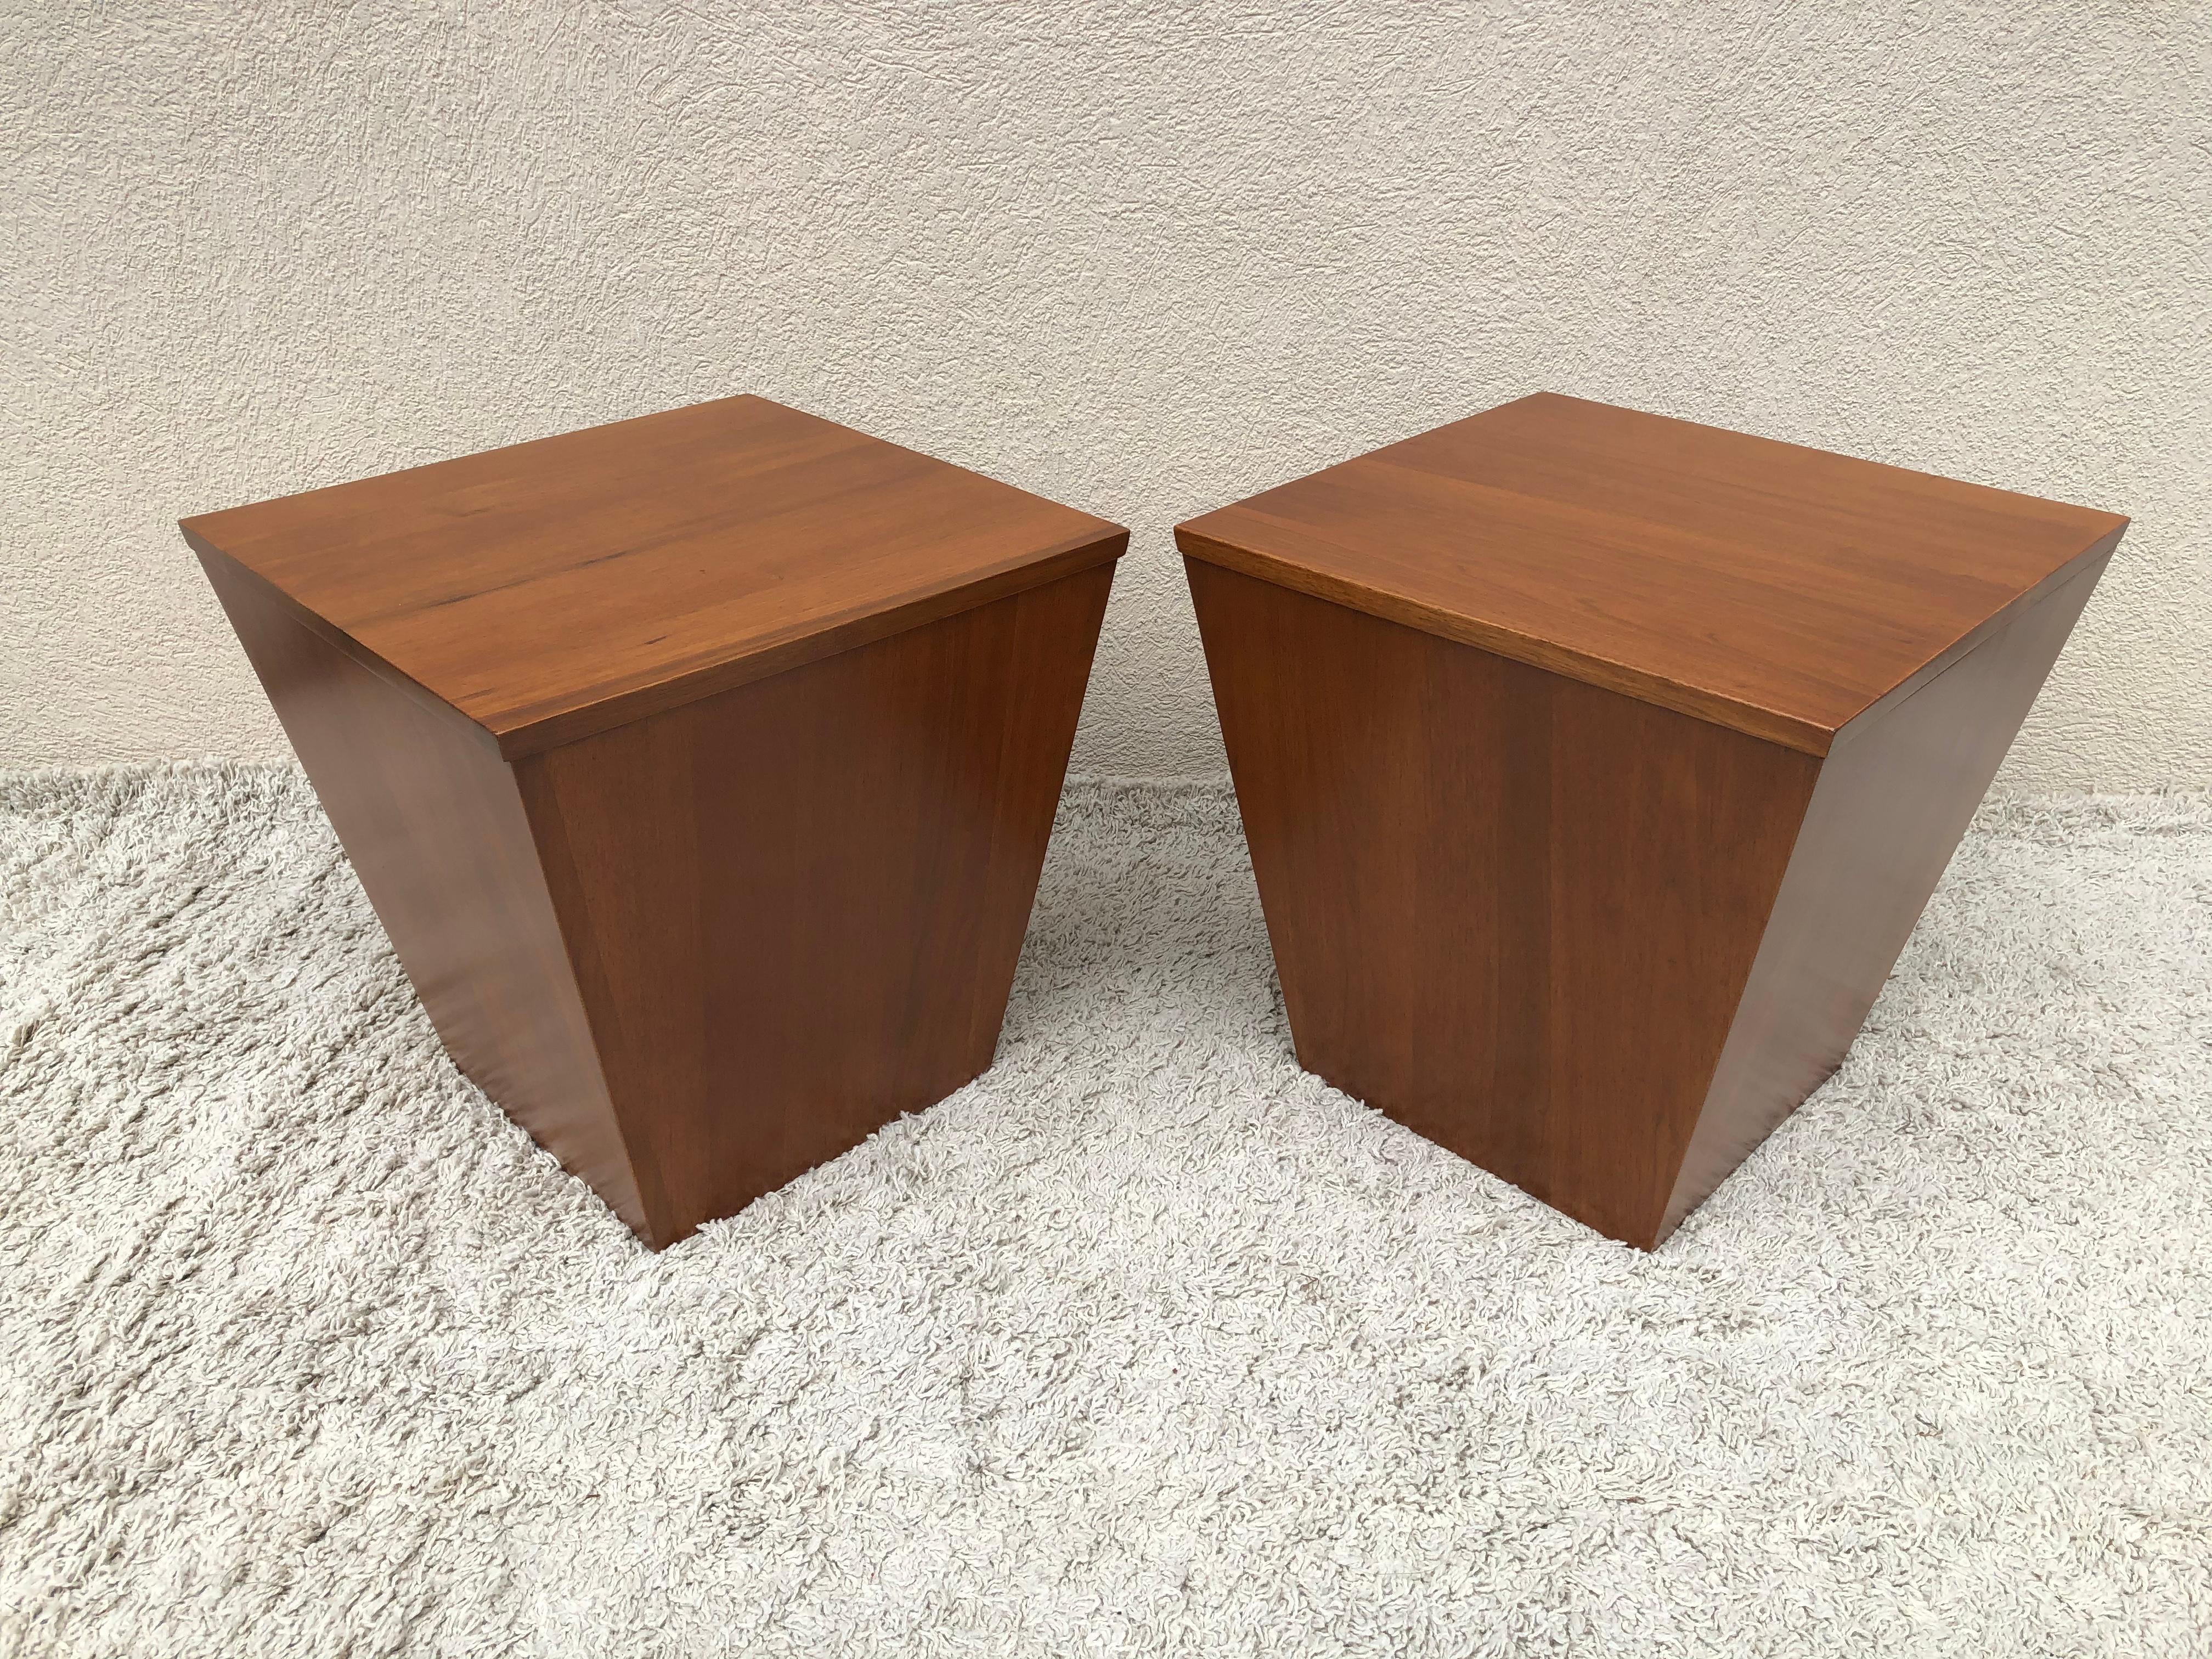 Pair of midcentury cube end tables with storage compartment mahogany wood lids are fitted to lift and store.